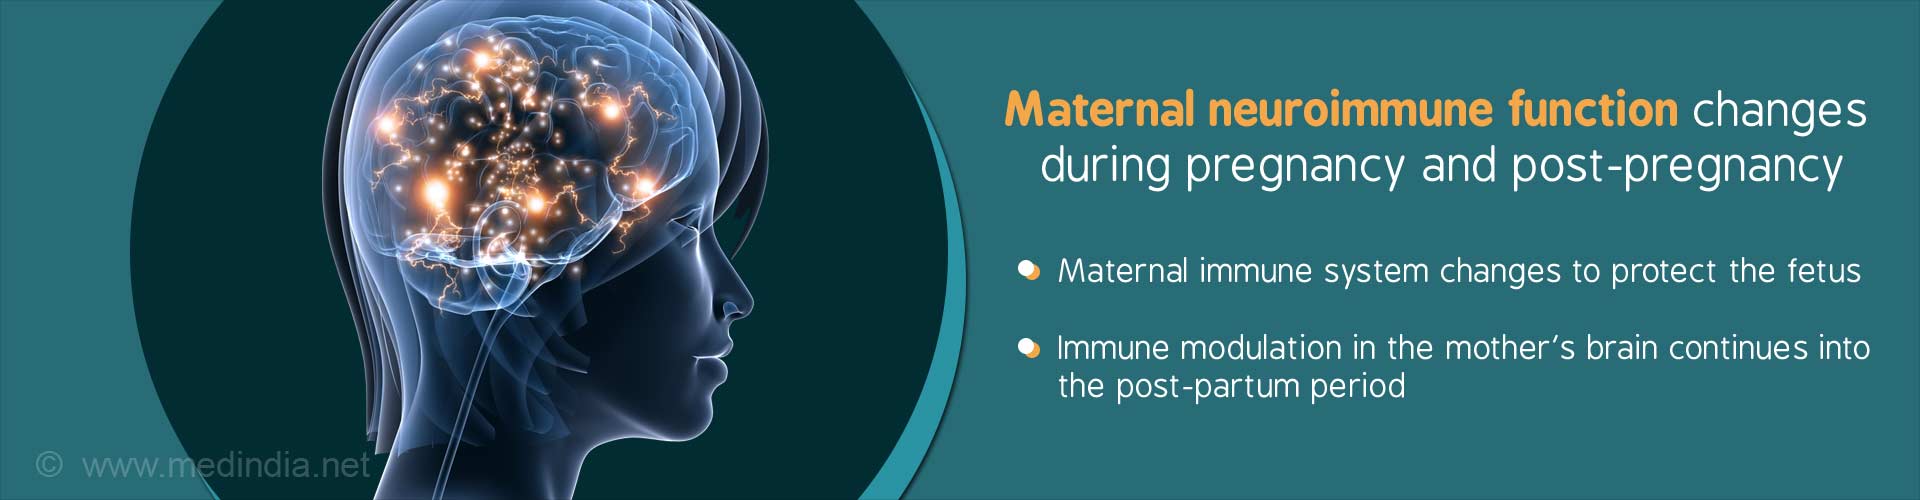 Maternal neuroimmune function changes during pregnancy and post-pregnancy
- Maternal immune system changes to protect the fetus
- immune modulation in the mother''s brain continues into the post-partum period